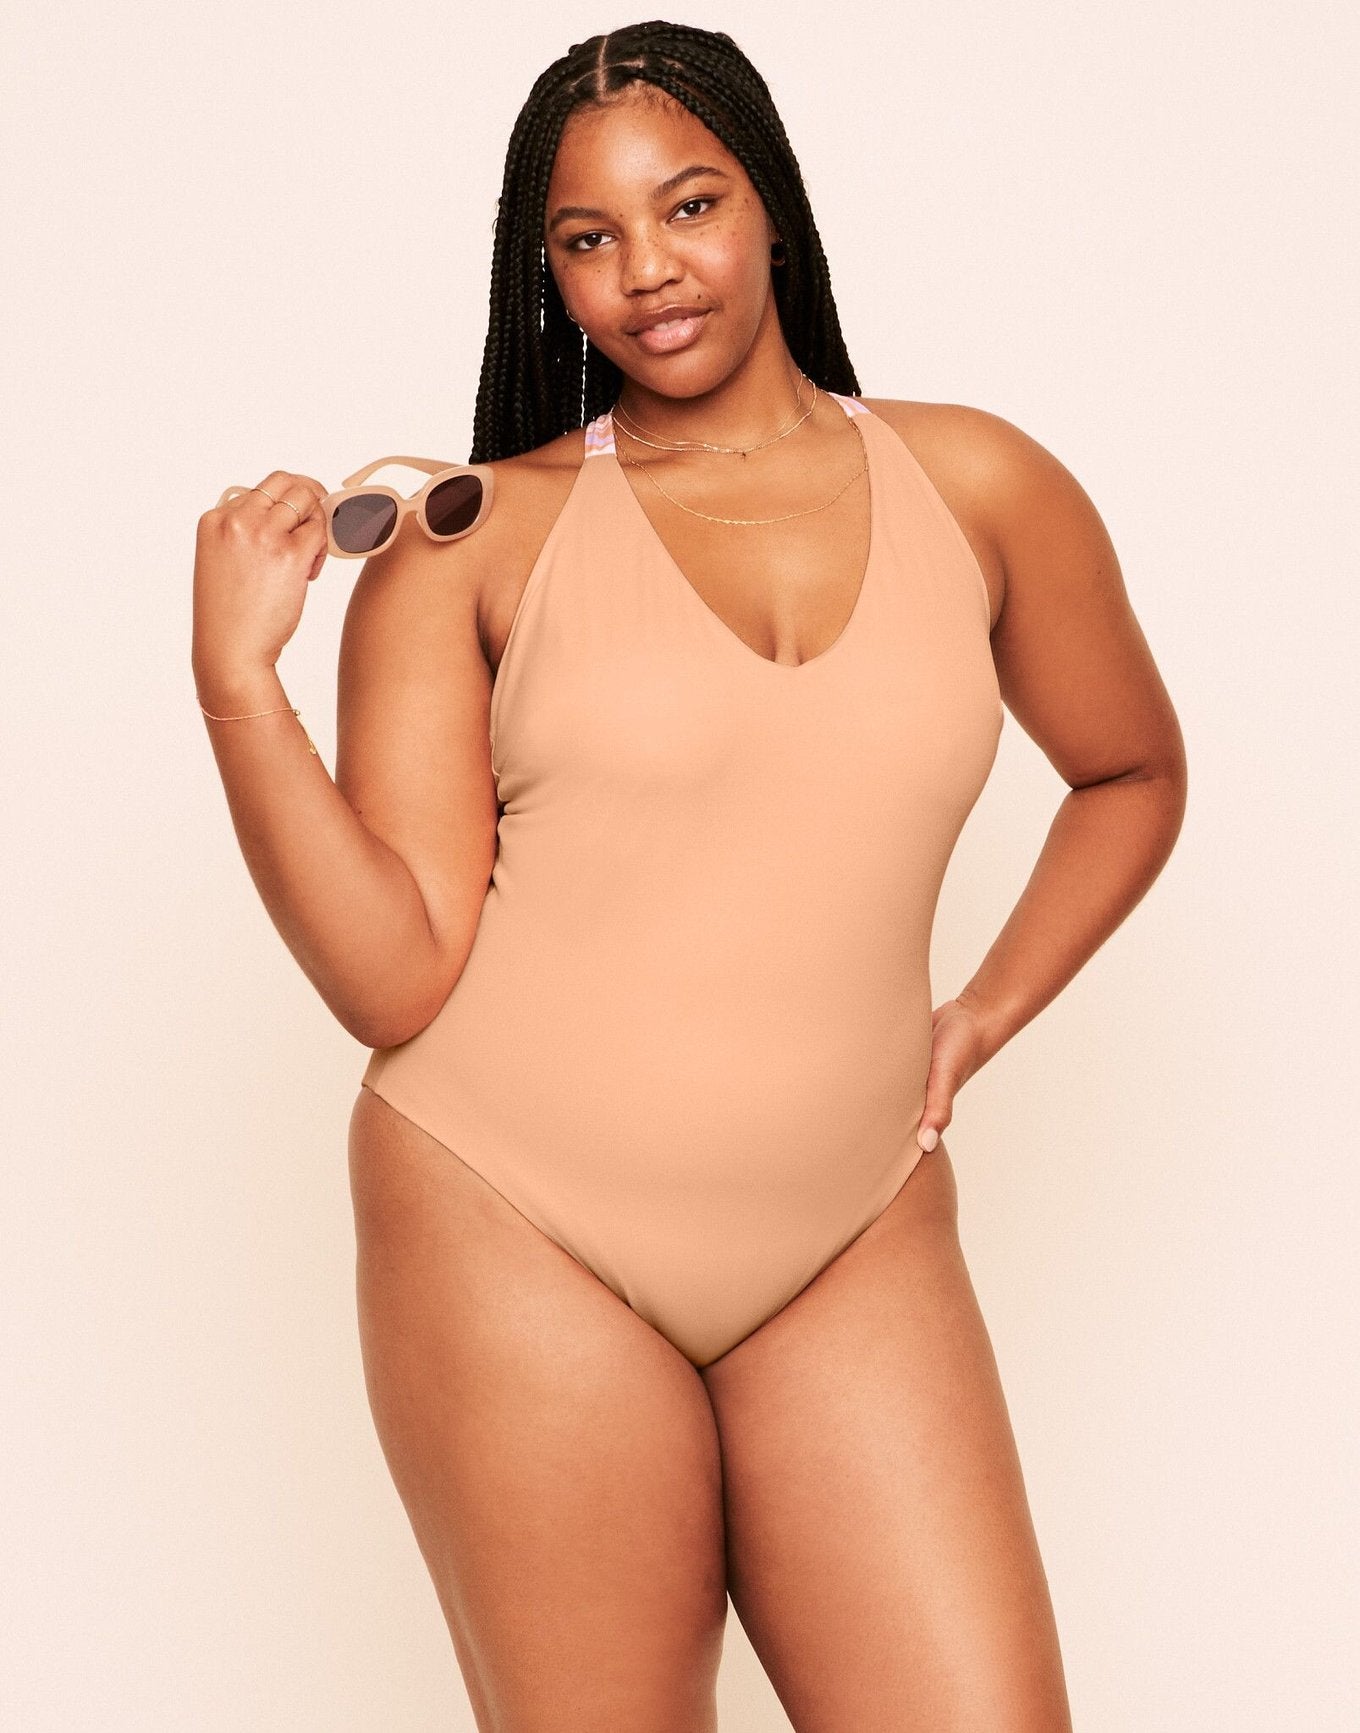 Earth Republic Serenity Reversible One Piece Reversible One-Piece in color PR171253 and shape one piece